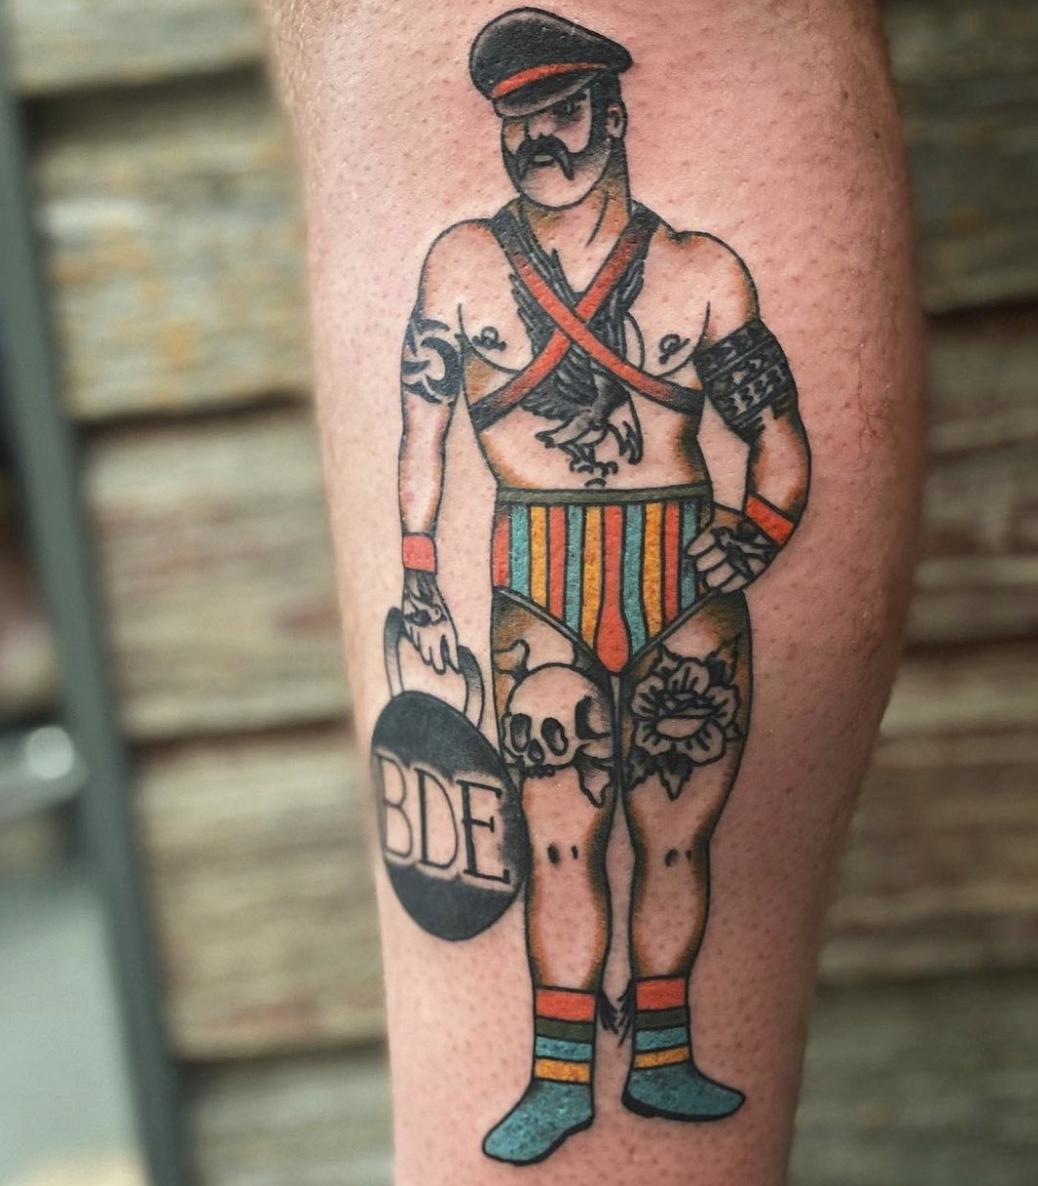 Tattoo by Billy Crandall at Ritual Tattoo in Denver, CO